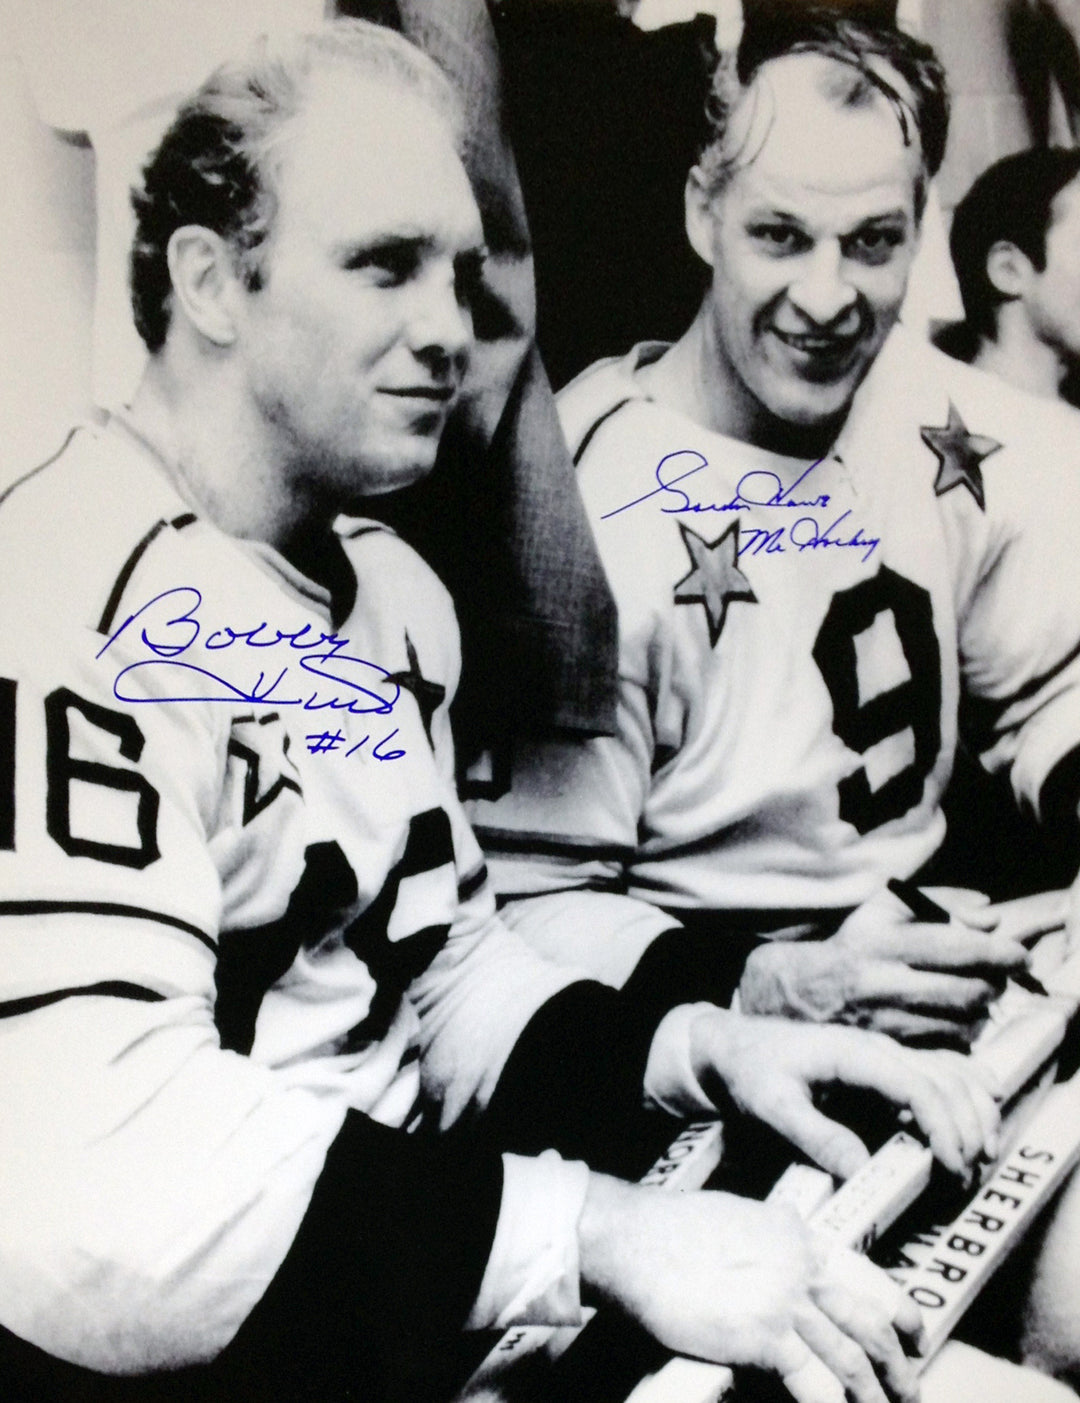 Autographed Photo Bobby Hull & Gordie Howe, Chicago Blackhawks, Detroit Red Wings, NHL, Hockey, Autographed, Signed, AAHPH31519